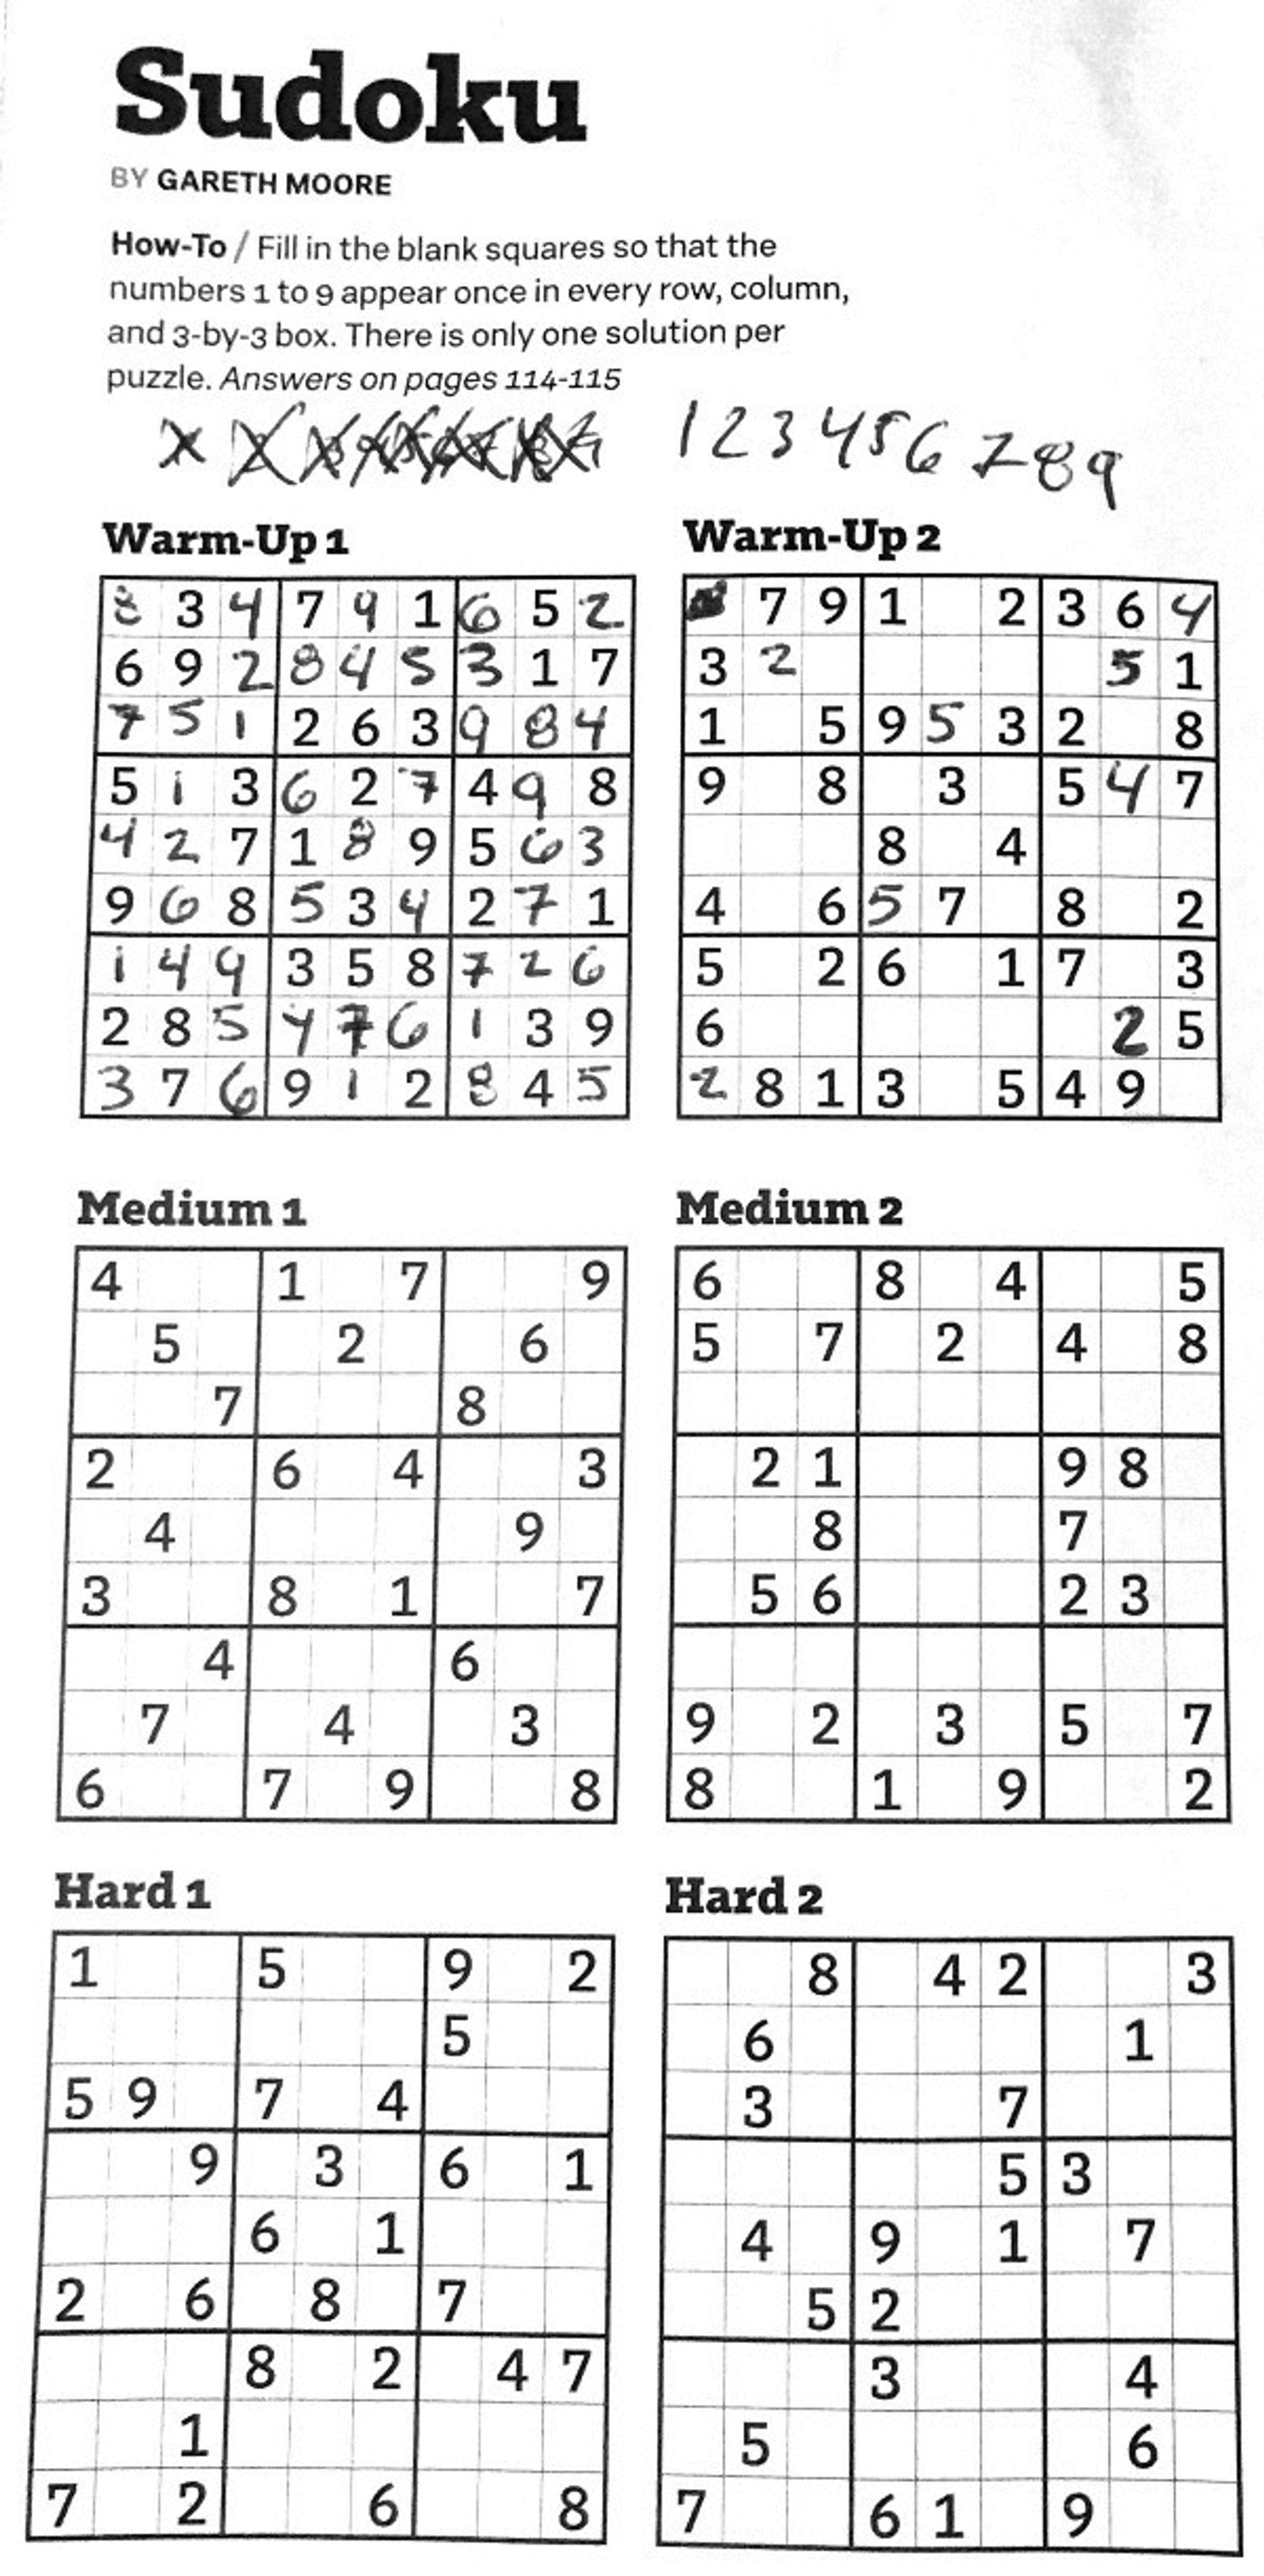 How to use Integer Linear Puzzling to Attain Sudoku Fame & Fortune